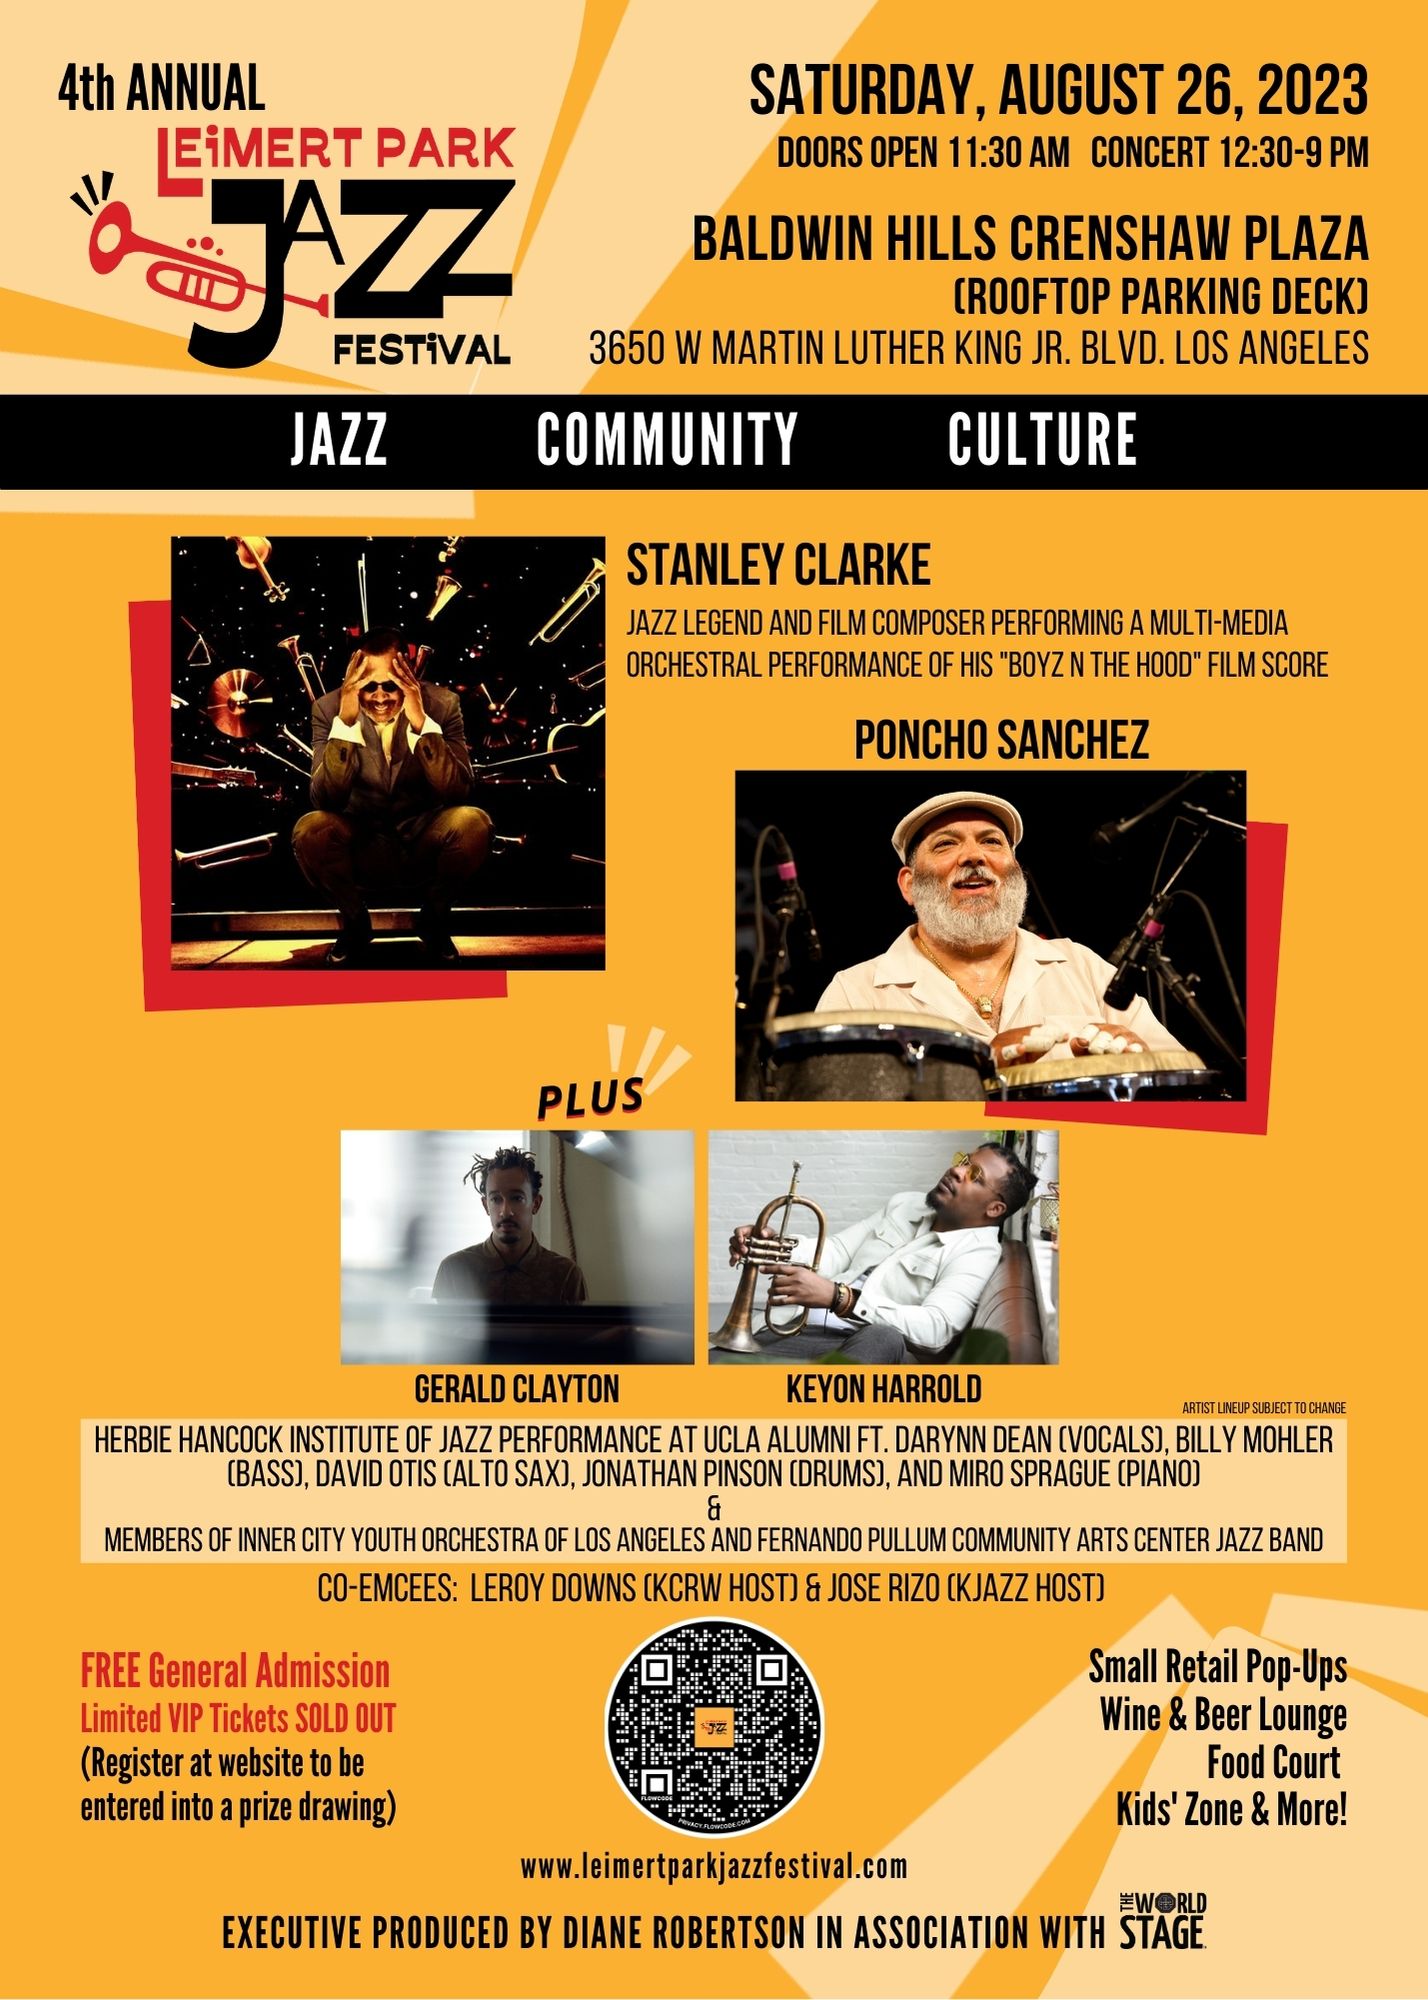 Yellow Background: "Yellow background with text and images for the 4th Annual Leimert Park Jazz Festival." Left Side: "The left side of the flyer featuring the event title '4th Annual Leimert Park Jazz Festival.'" Right Side: "The right side of the flyer displaying the event details: Date - Saturday, August 26, 2023; Time - Doors open at 11:30 am, Concert from 12:30 pm to 9:00 pm." Middle Section - Artists Lineup: Stanley Clarke: "Image of Stanley Clarke, a renowned jazz artist, holding his bass guitar." Poncho Sanchez: "Image of Poncho Sanchez, a celebrated Latin jazz musician, playing conga drums." Gerald Clayton: "Image of Gerald Clayton, a talented jazz pianist, seated at a grand piano." Kevon Harrold: "Image of Kevon Harrold, a skilled jazz trumpeter, playing his trumpet."